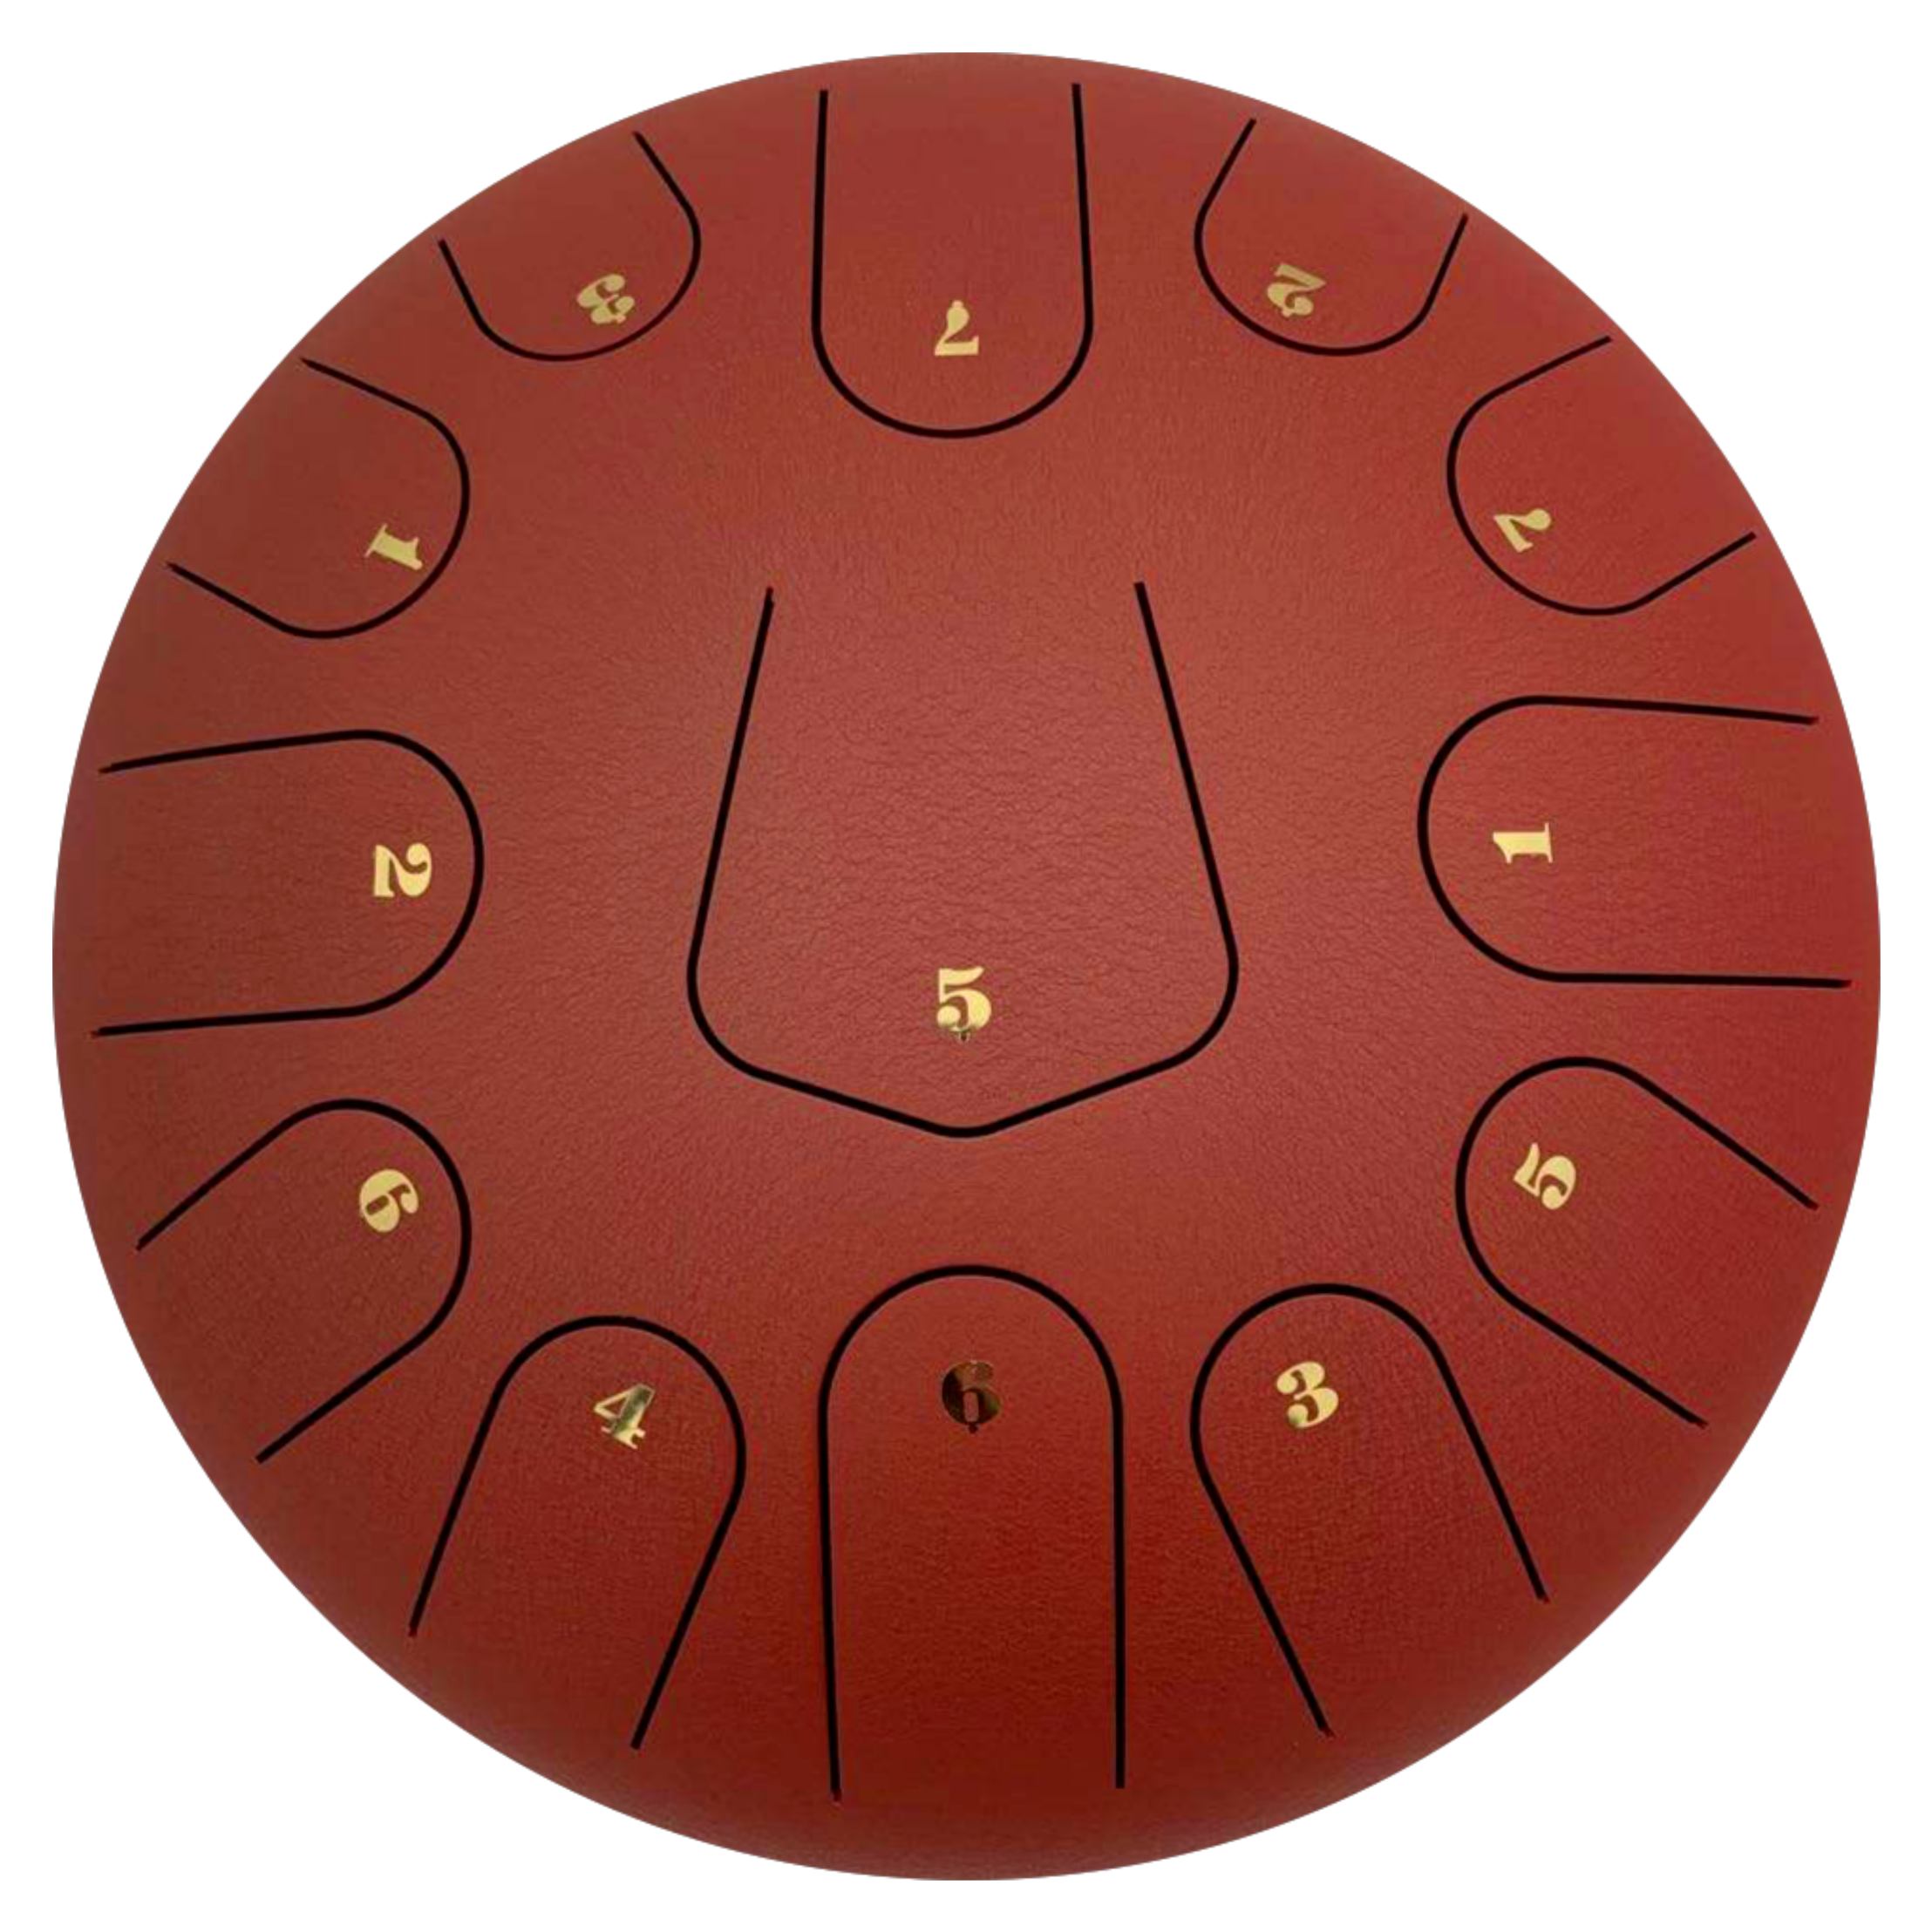 Cosmos Steel Tongue Drum | 12 Inch 13 Notes Tank Drum for Yoga & Meditation with gift set